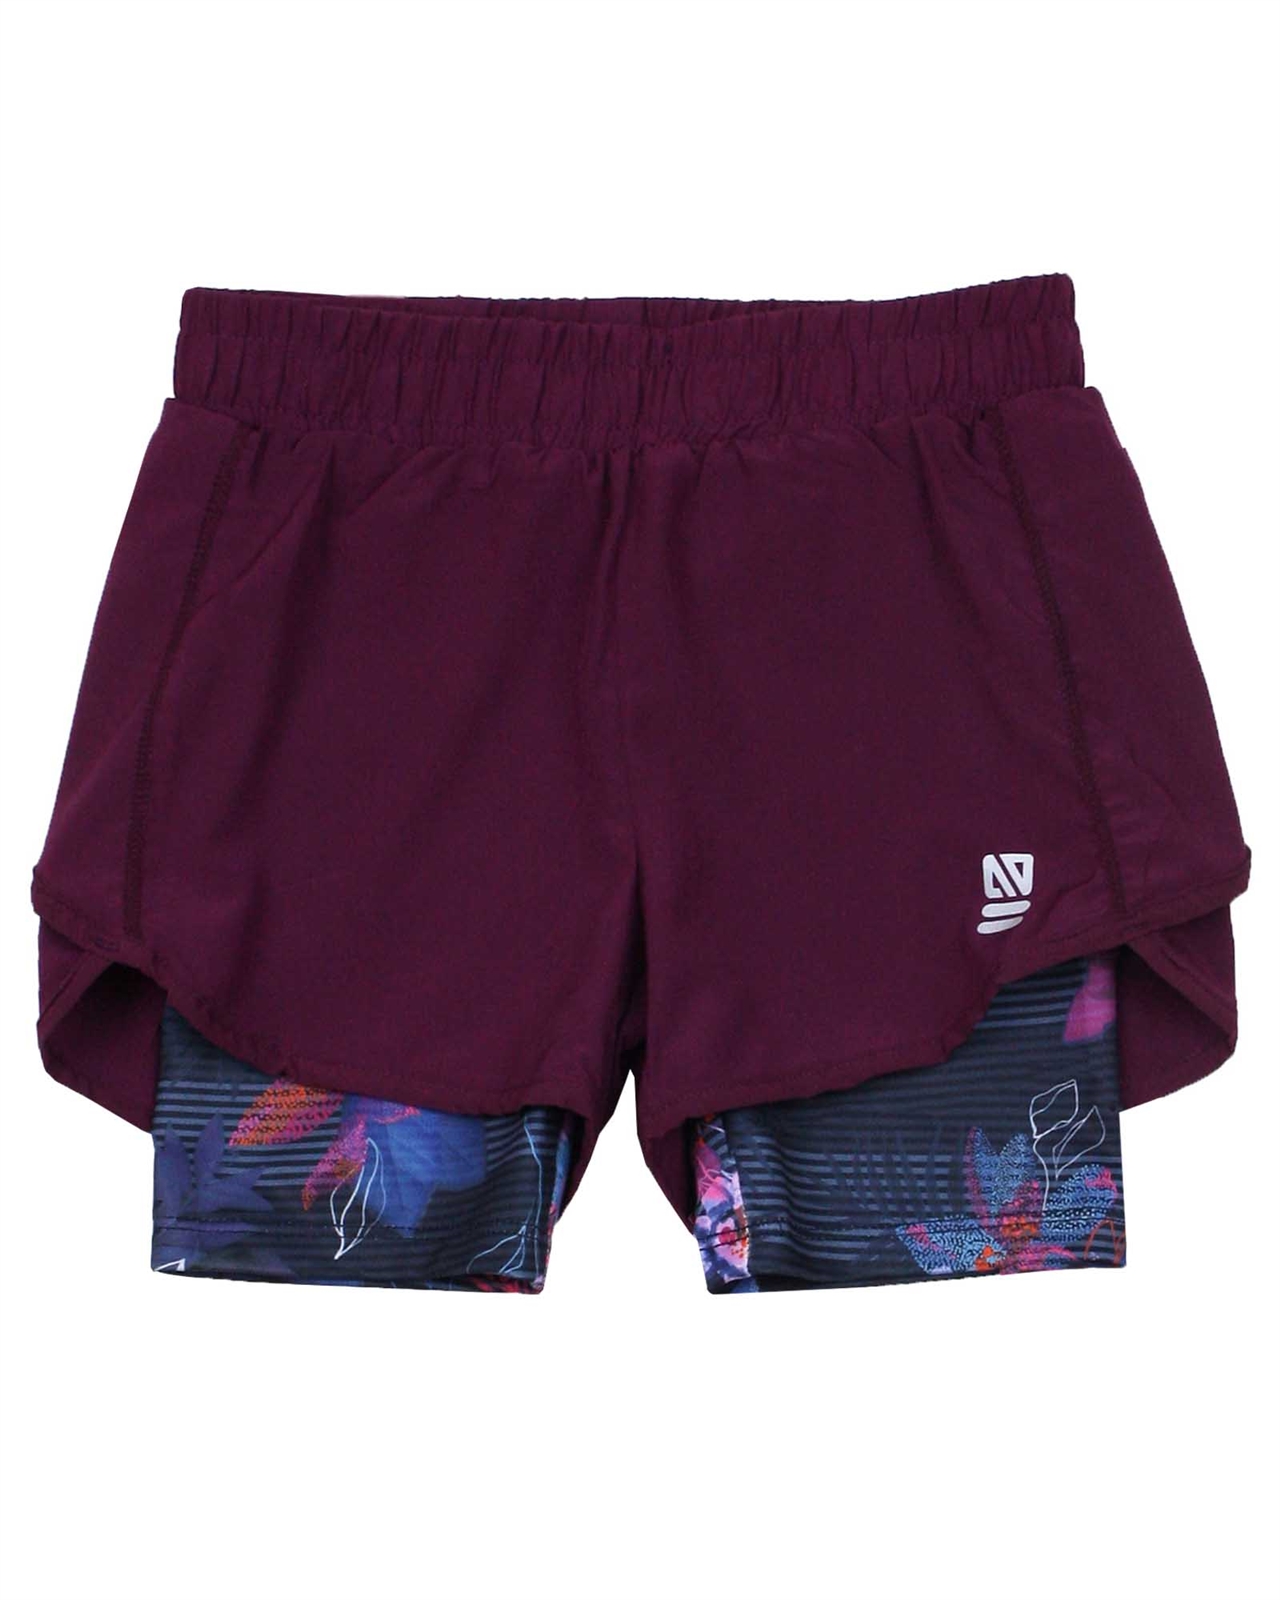 NANO Girls' Two-in-one Athletic Shorts, Sizes 4-14